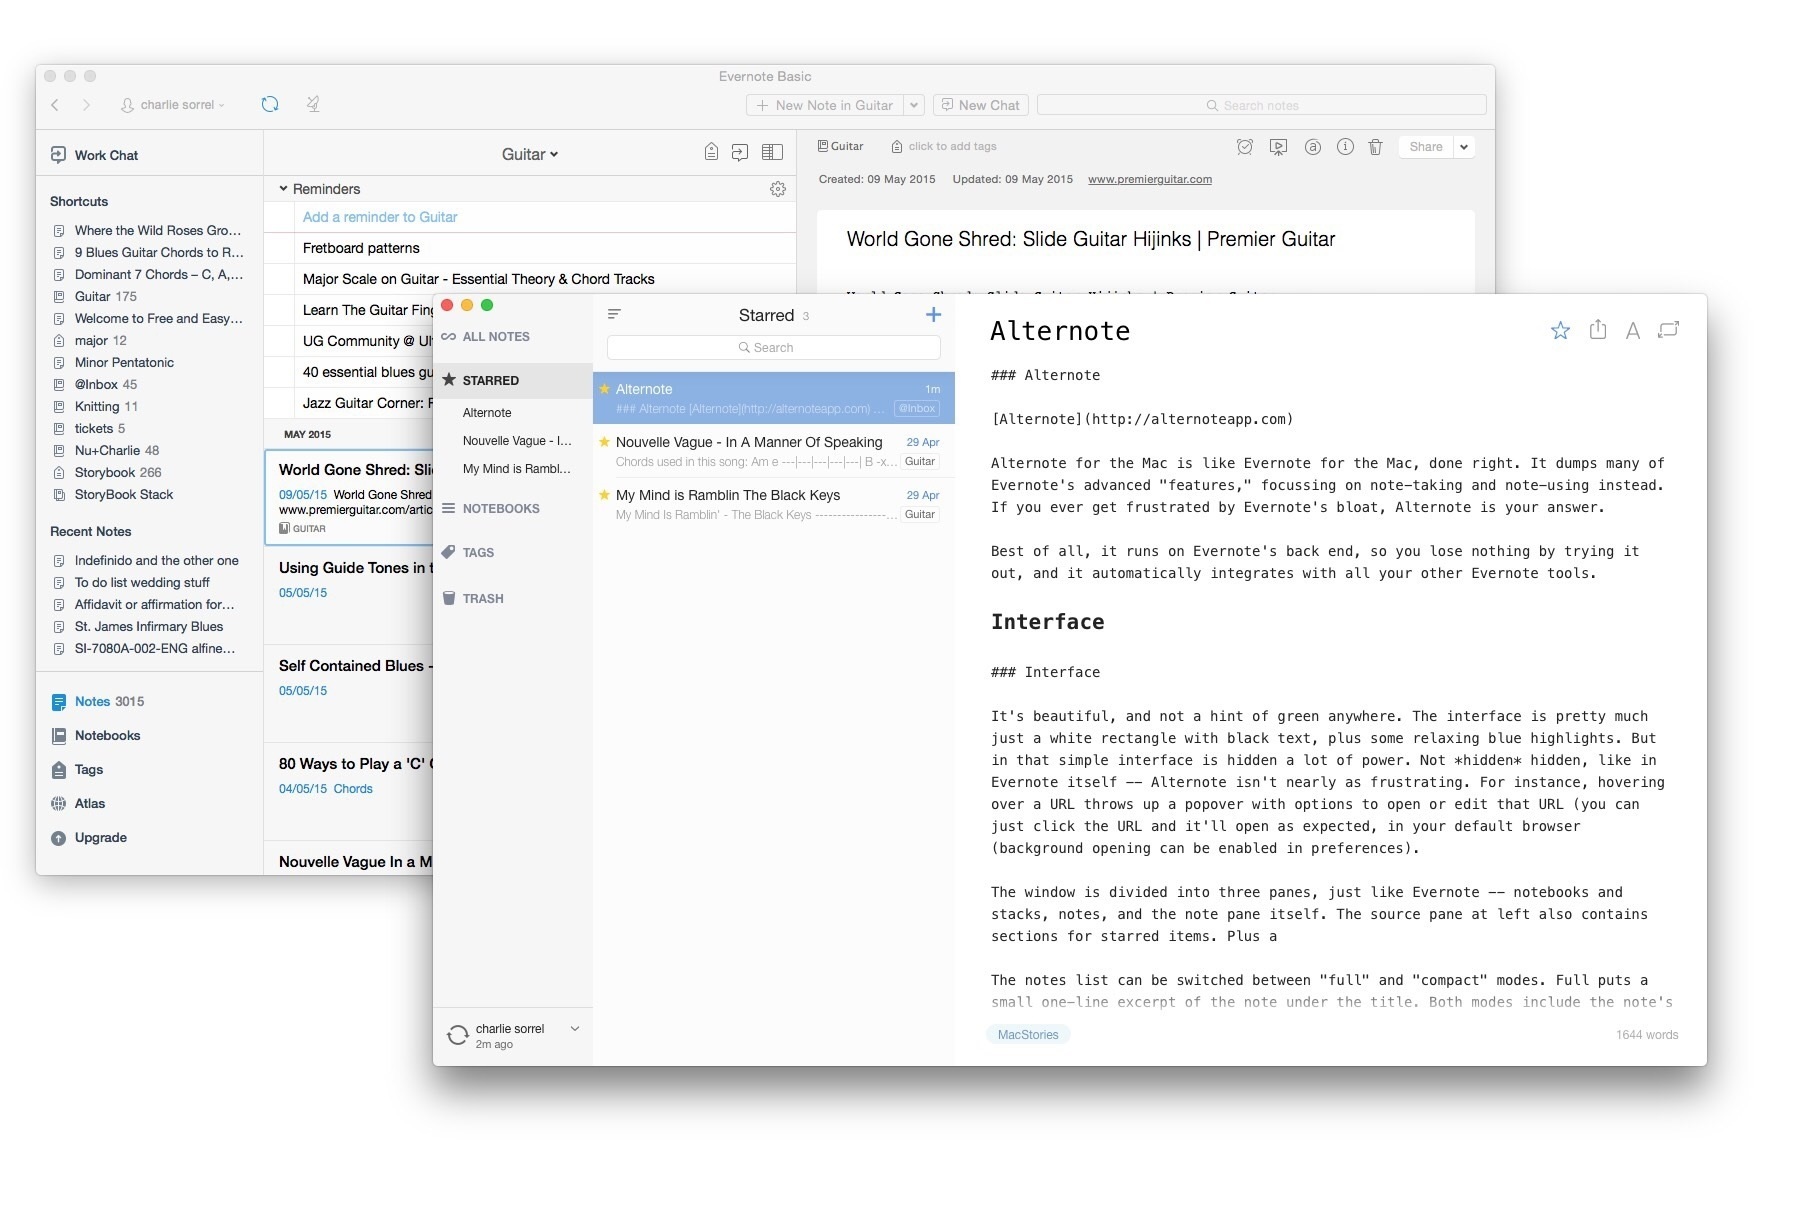 Even with Evernote's recent cleanup, Alternote is still simpler and prettier